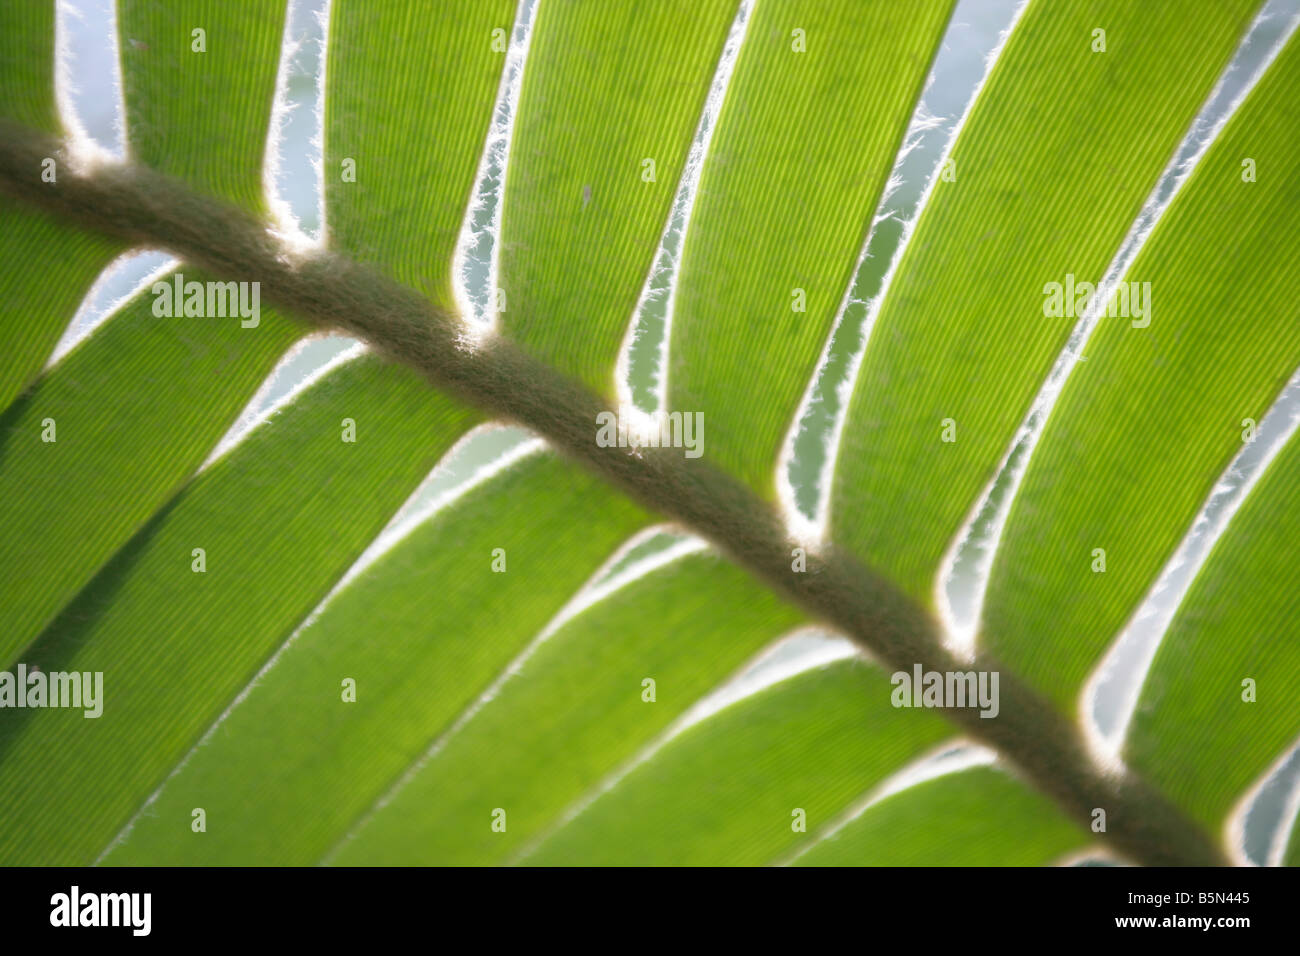 A close up shot of a green tropical leaf in a fan shape Stock Photo